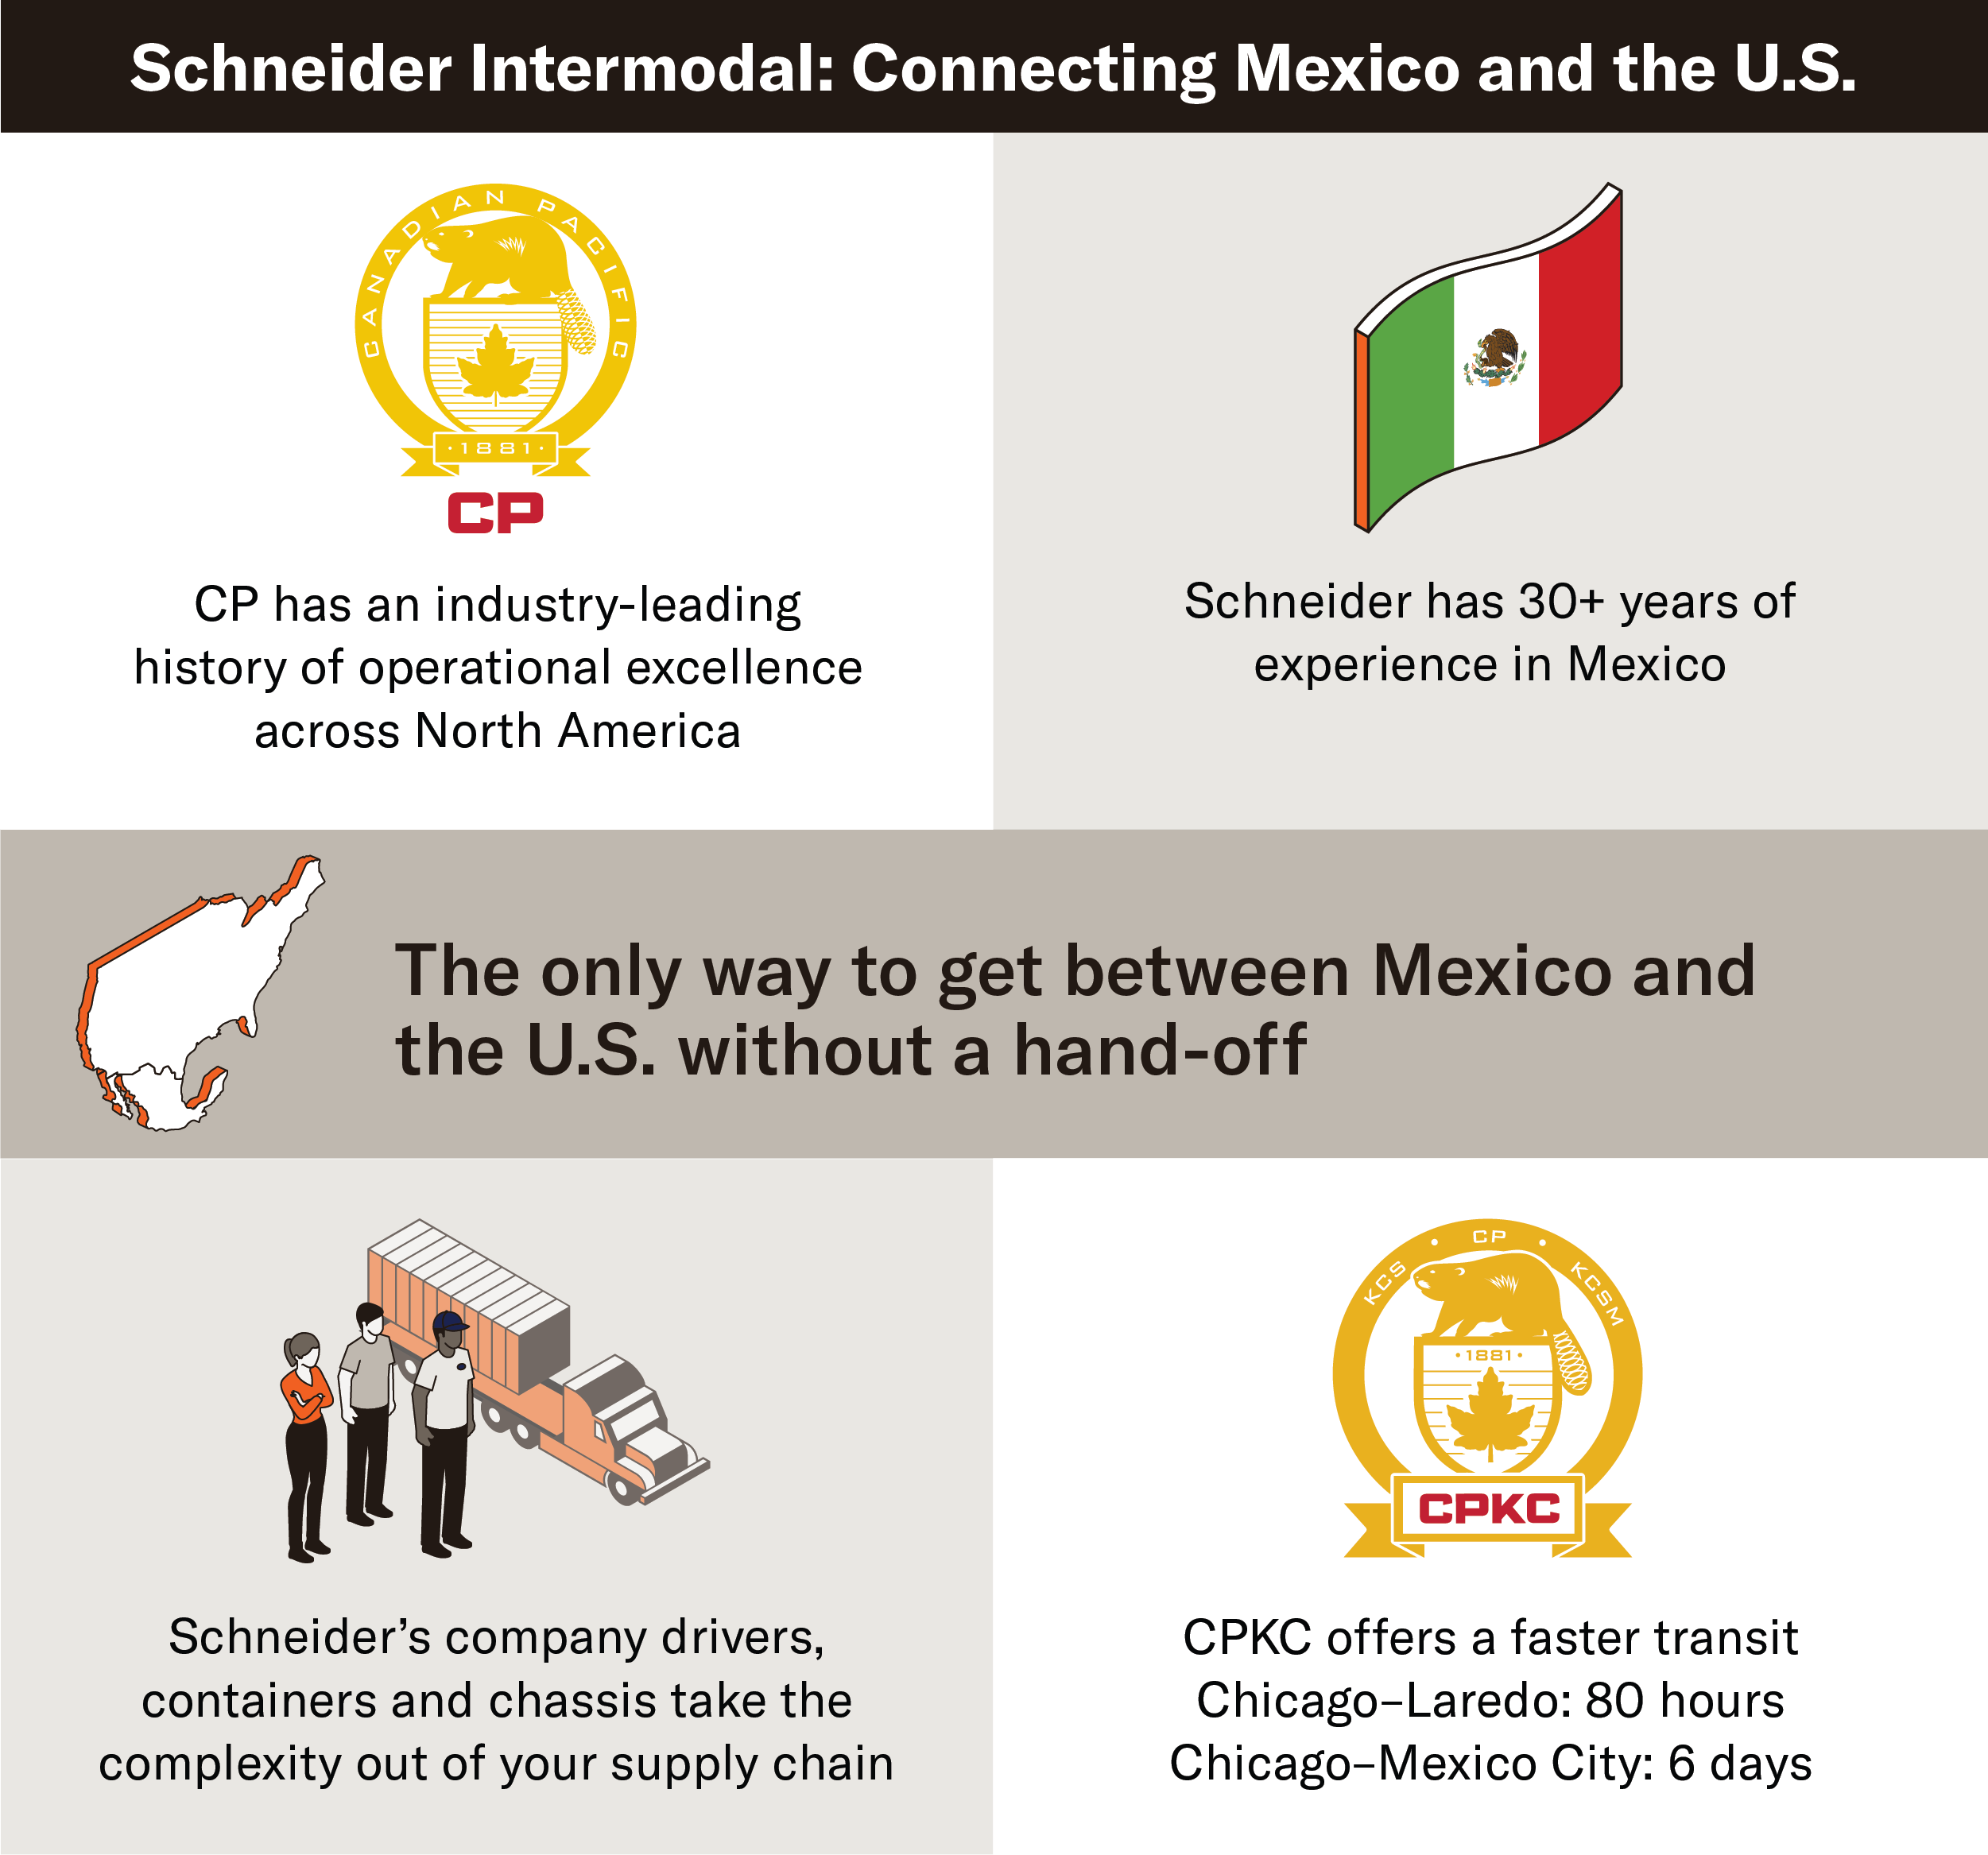 Benefits of Schneider’s new Mexico to upper Midwest intermodal service with CPKC